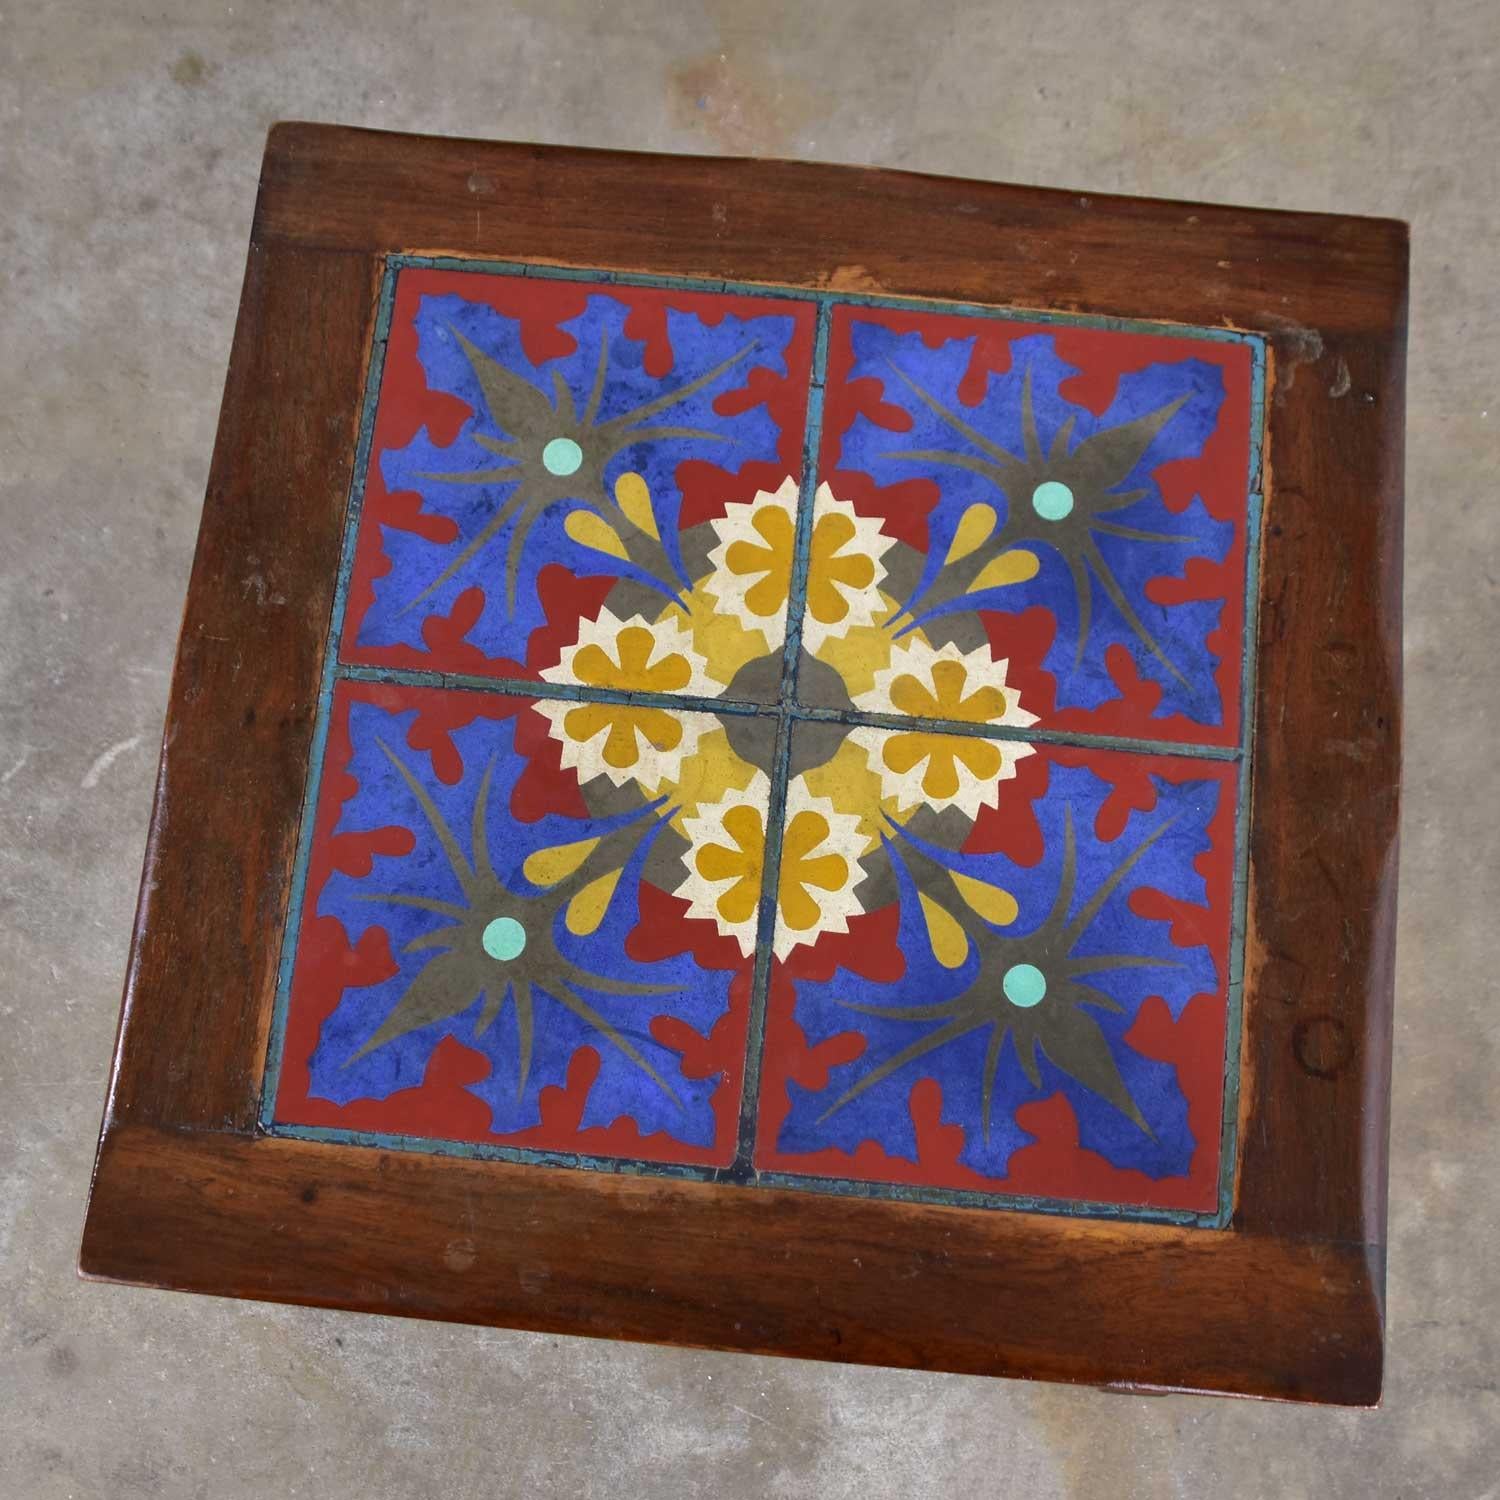 Inconnu Table d'appoint Catalina California ou Mission Arts & Craft Style Spanish Tile Top en vente